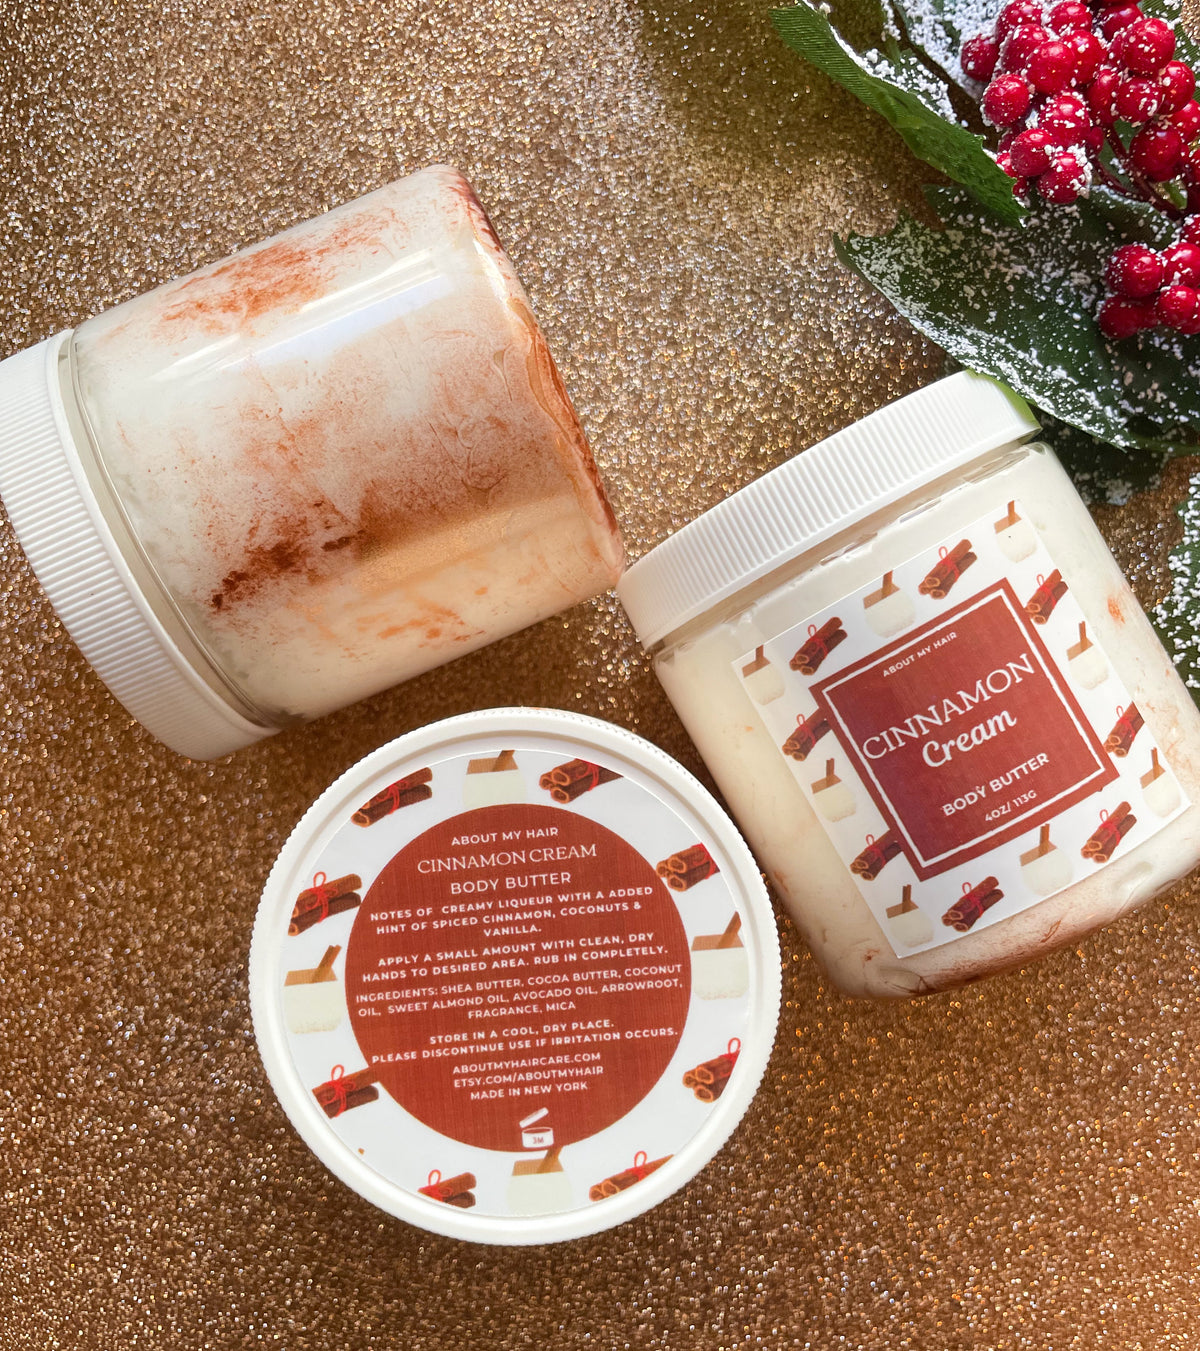 Cinnamon Cream Body Butter | About My Hair Care